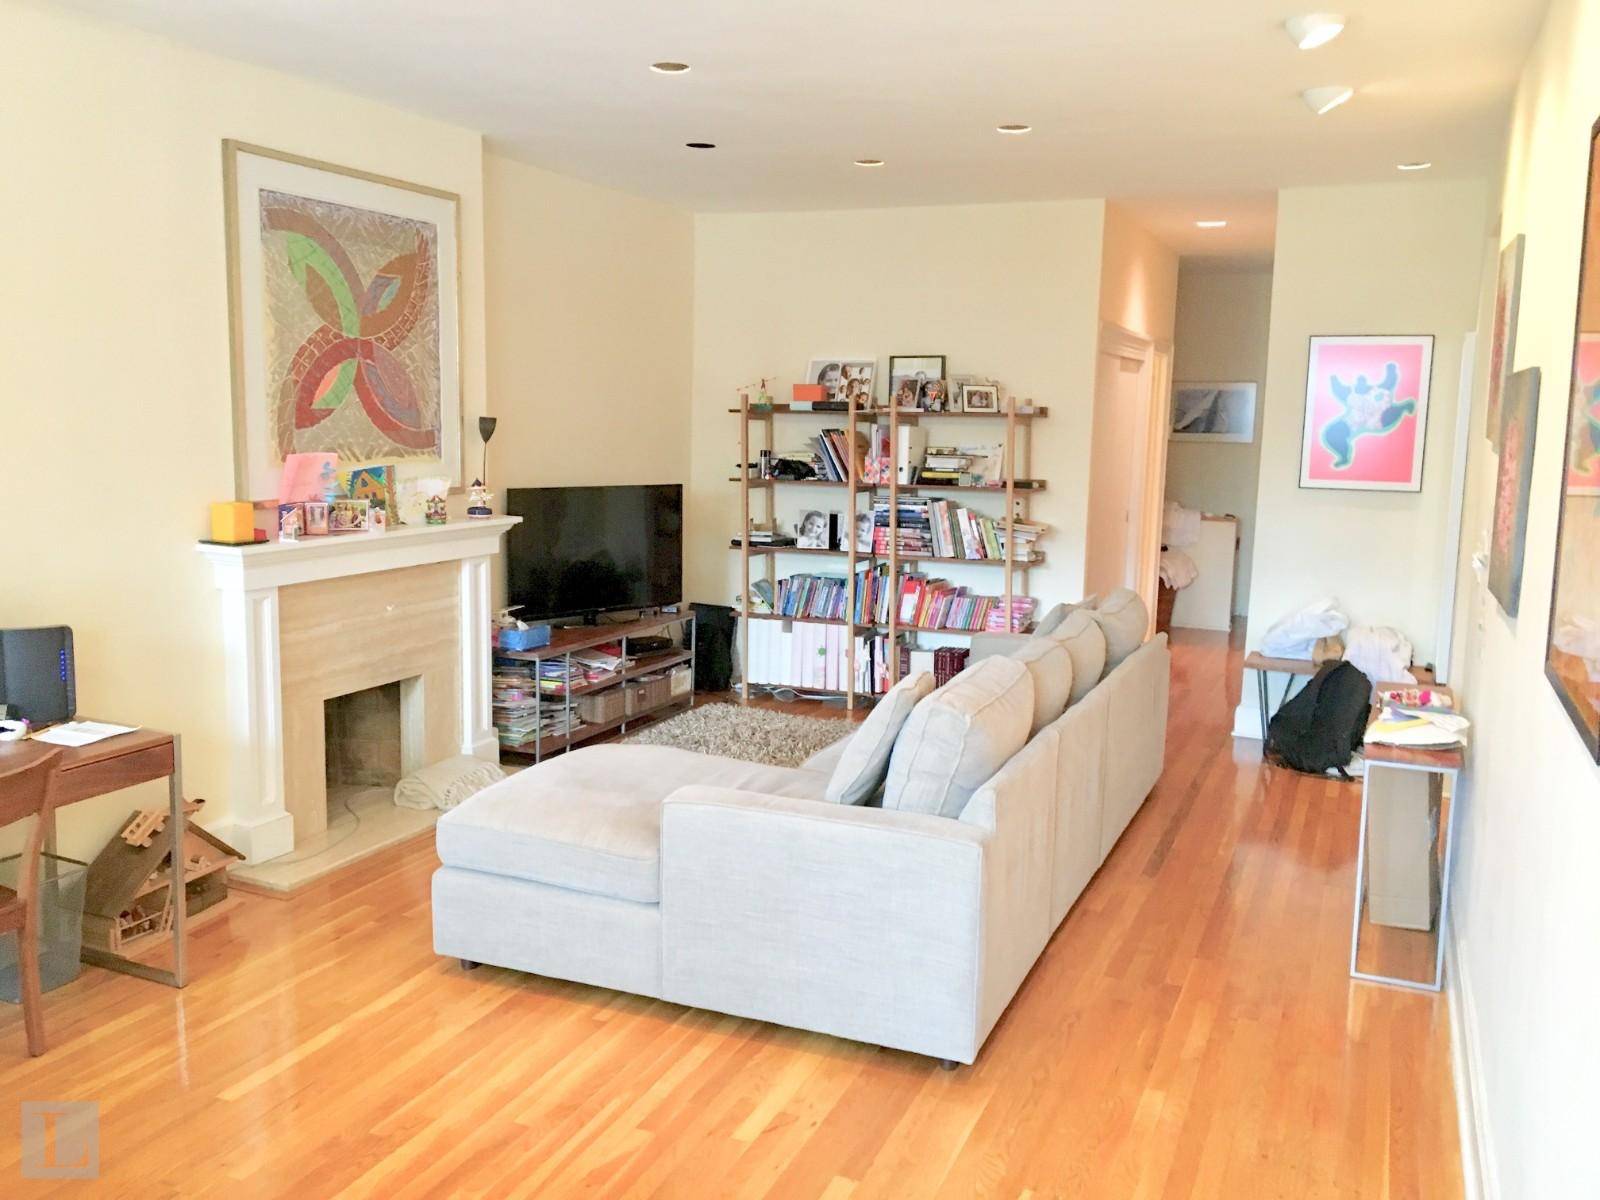 Duplex Penthouse between Madison and Fifth Aves on 80th Street !